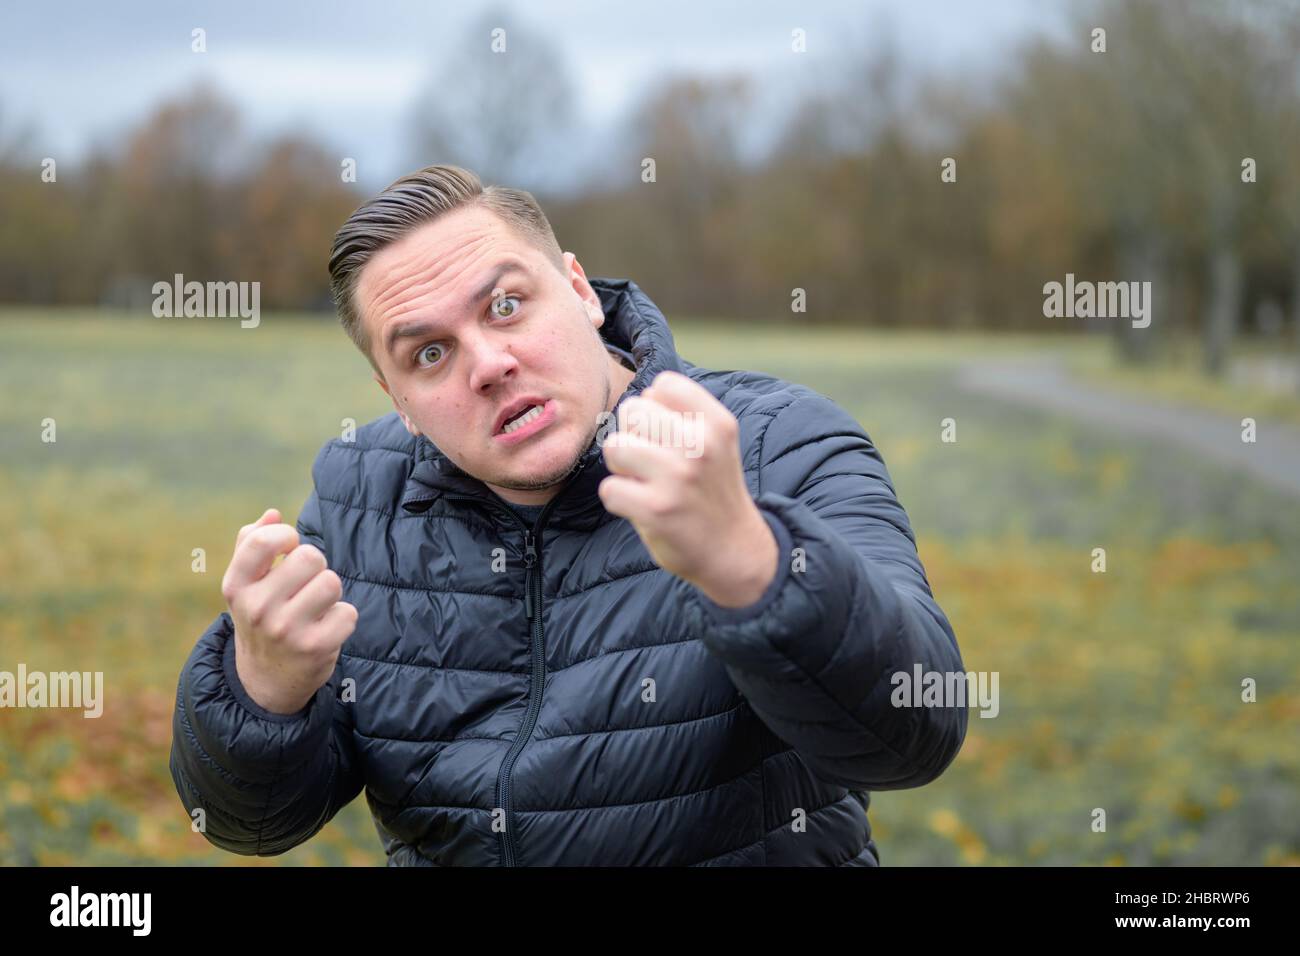 Aggressive Angry Young Man Threatening The Camera With Raised Clenched